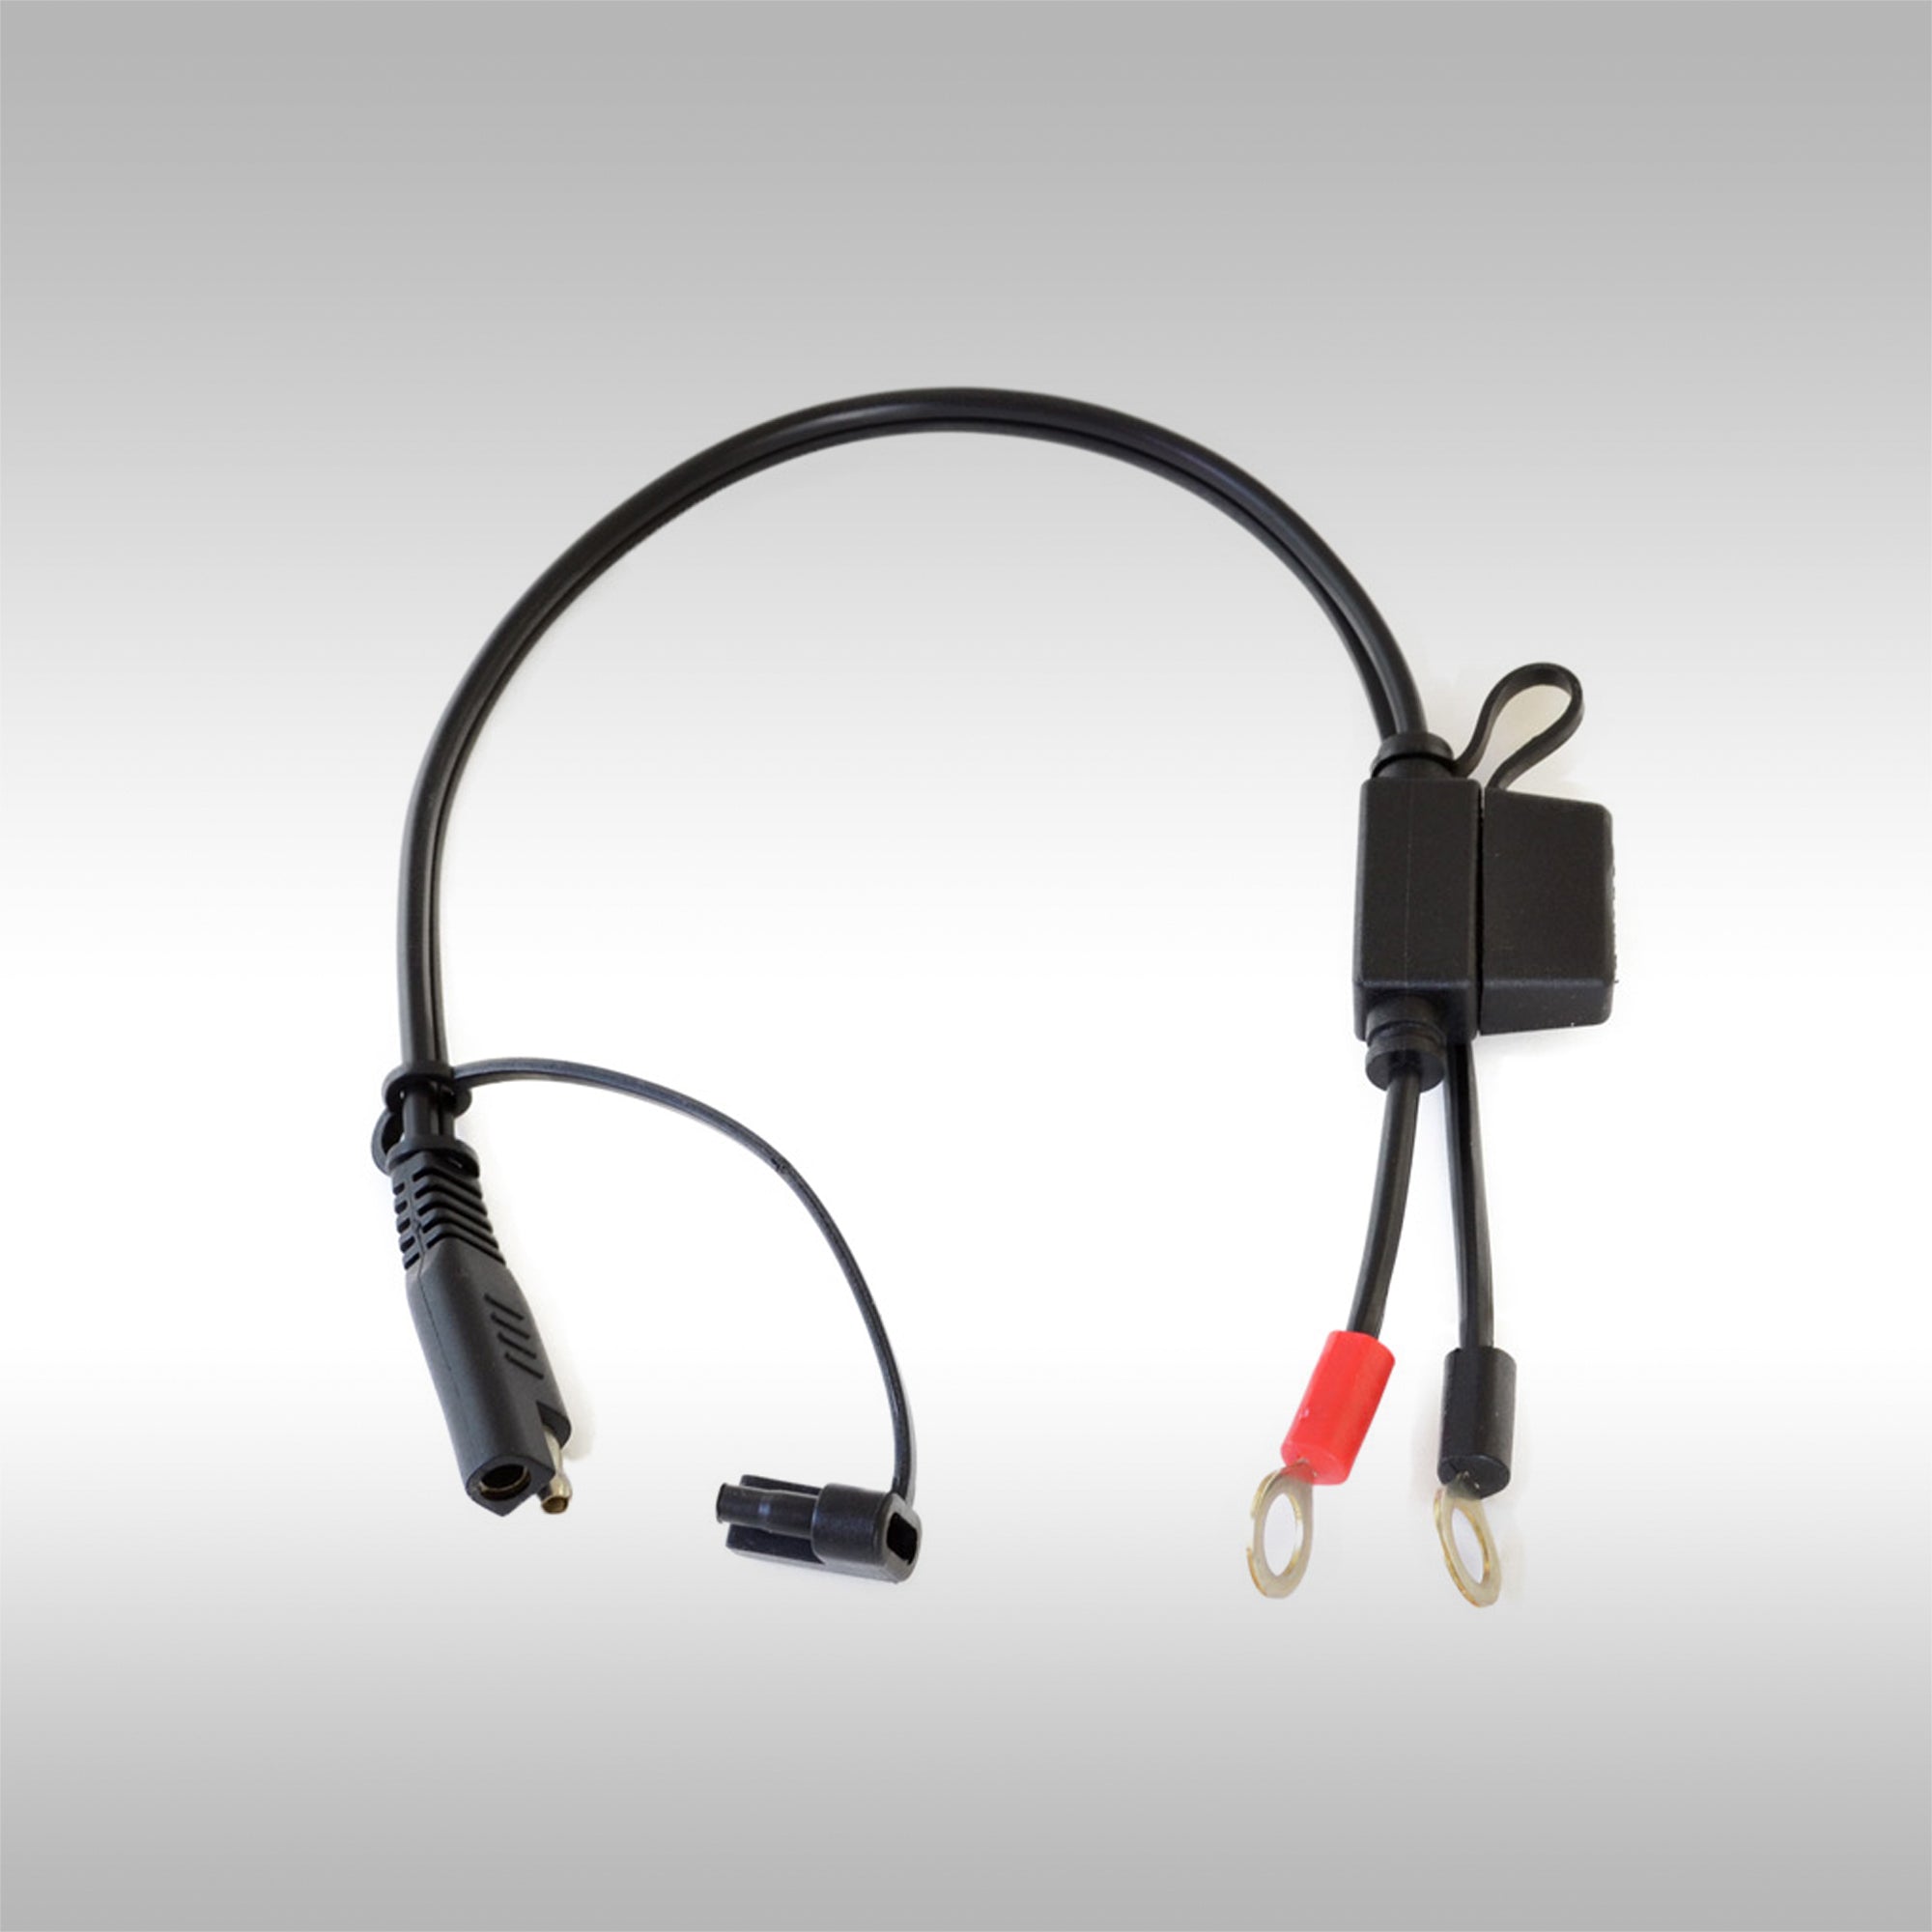 SAE wiring harness for motorcycle battery chargers.